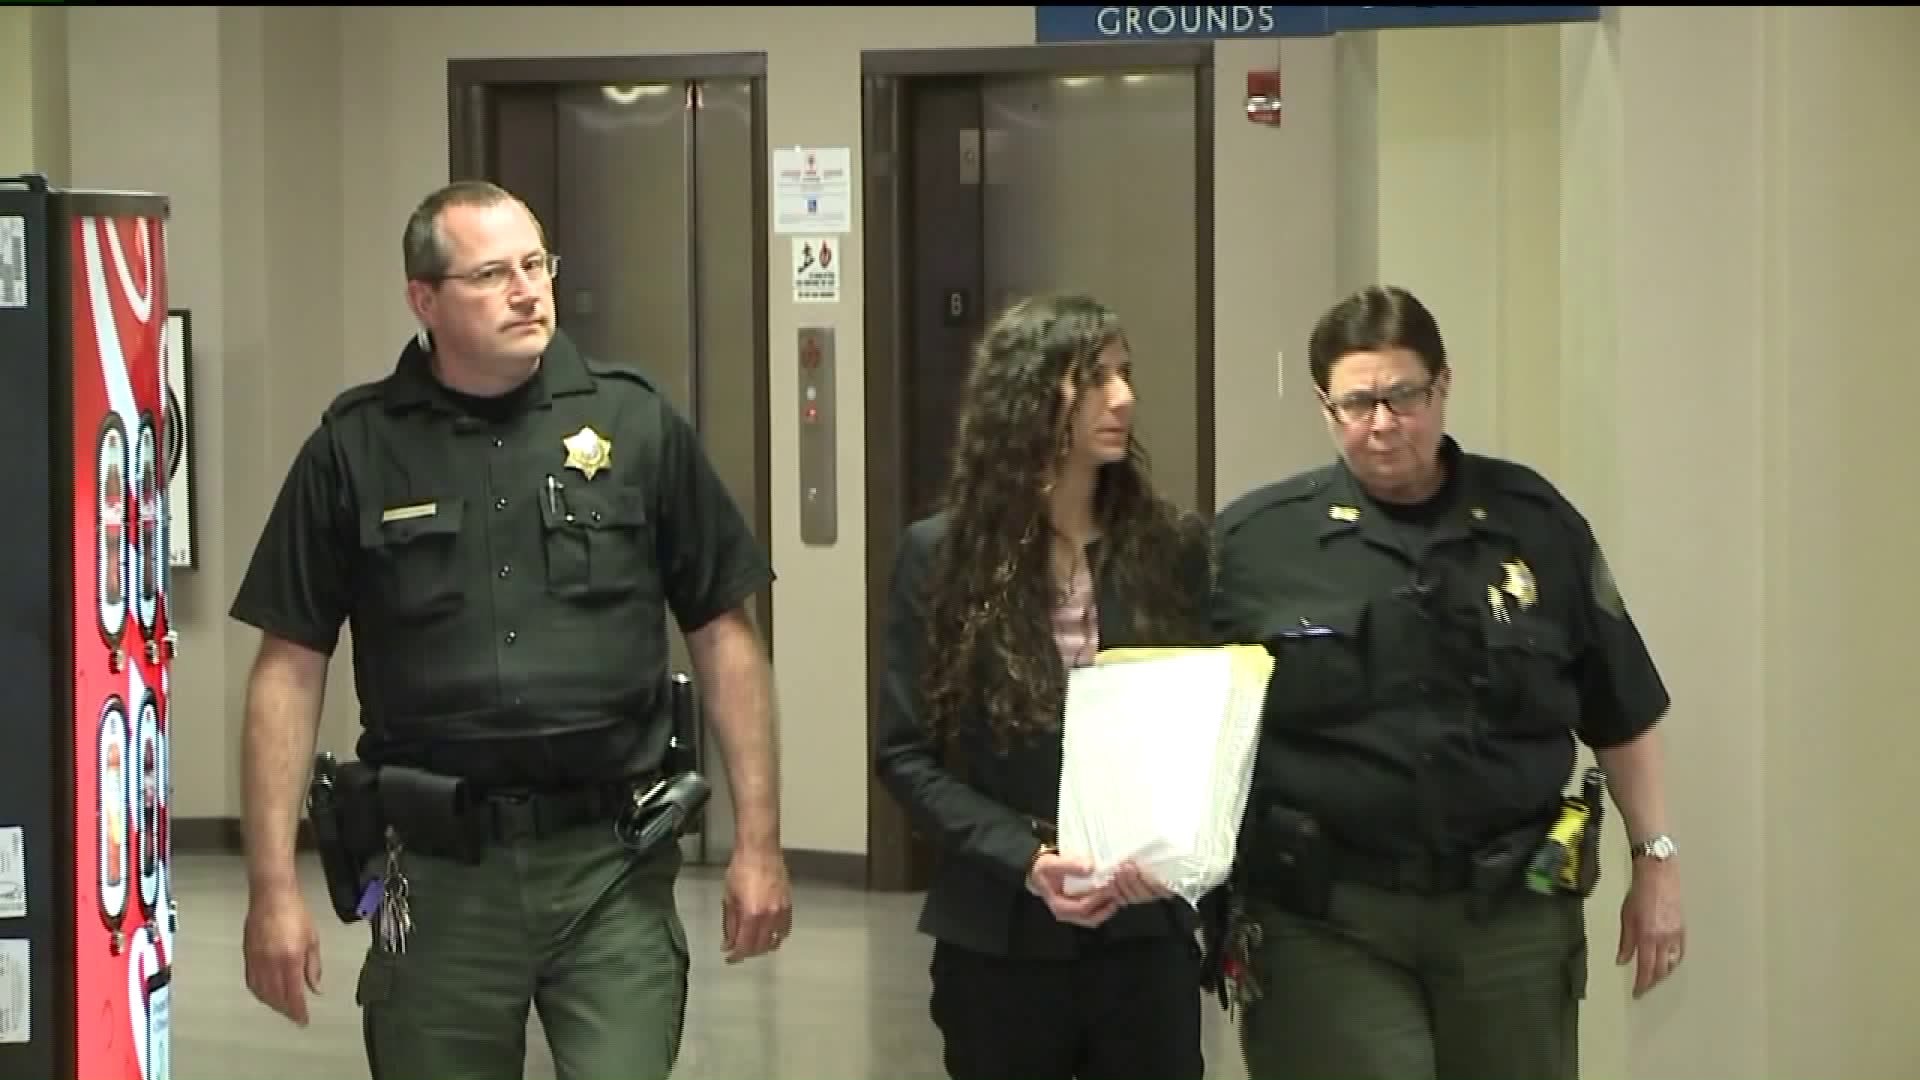 Mistrial Declared in Case of Mother Accused of Trying to Kill Self and Kids